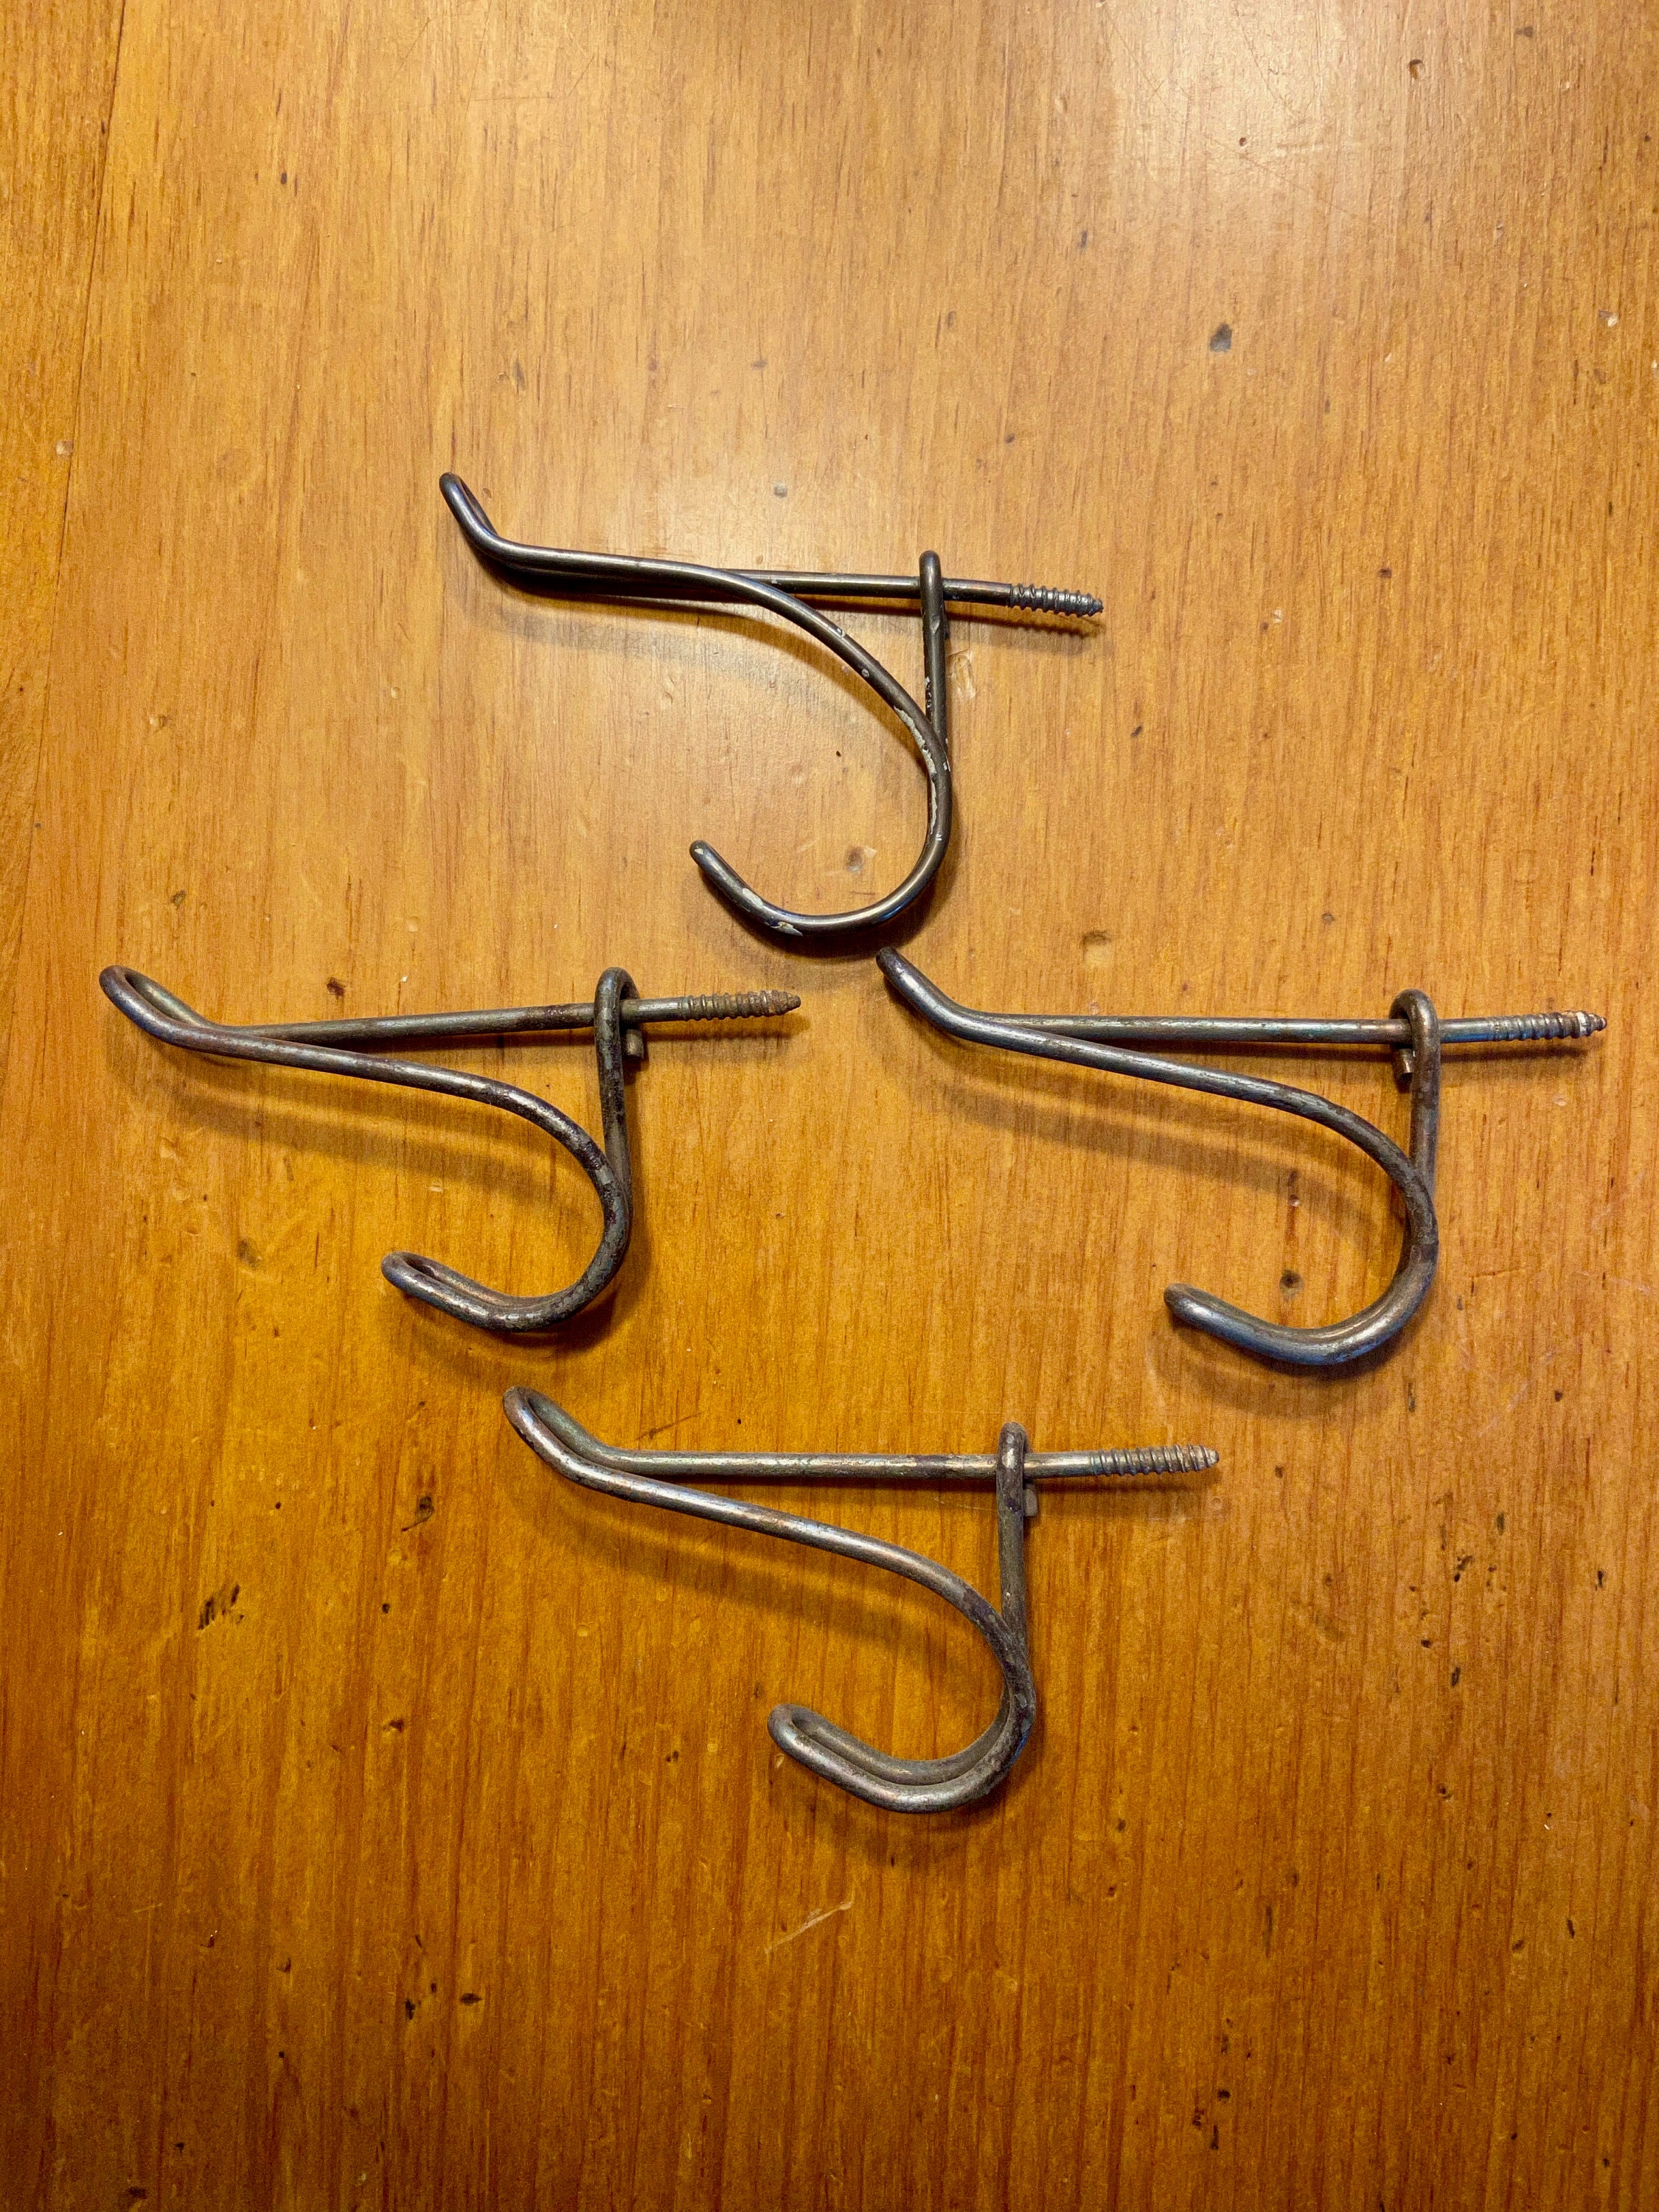 Vintage Wire Coat Hooks Set of 4 DIY Projects Wall Hanging Decor